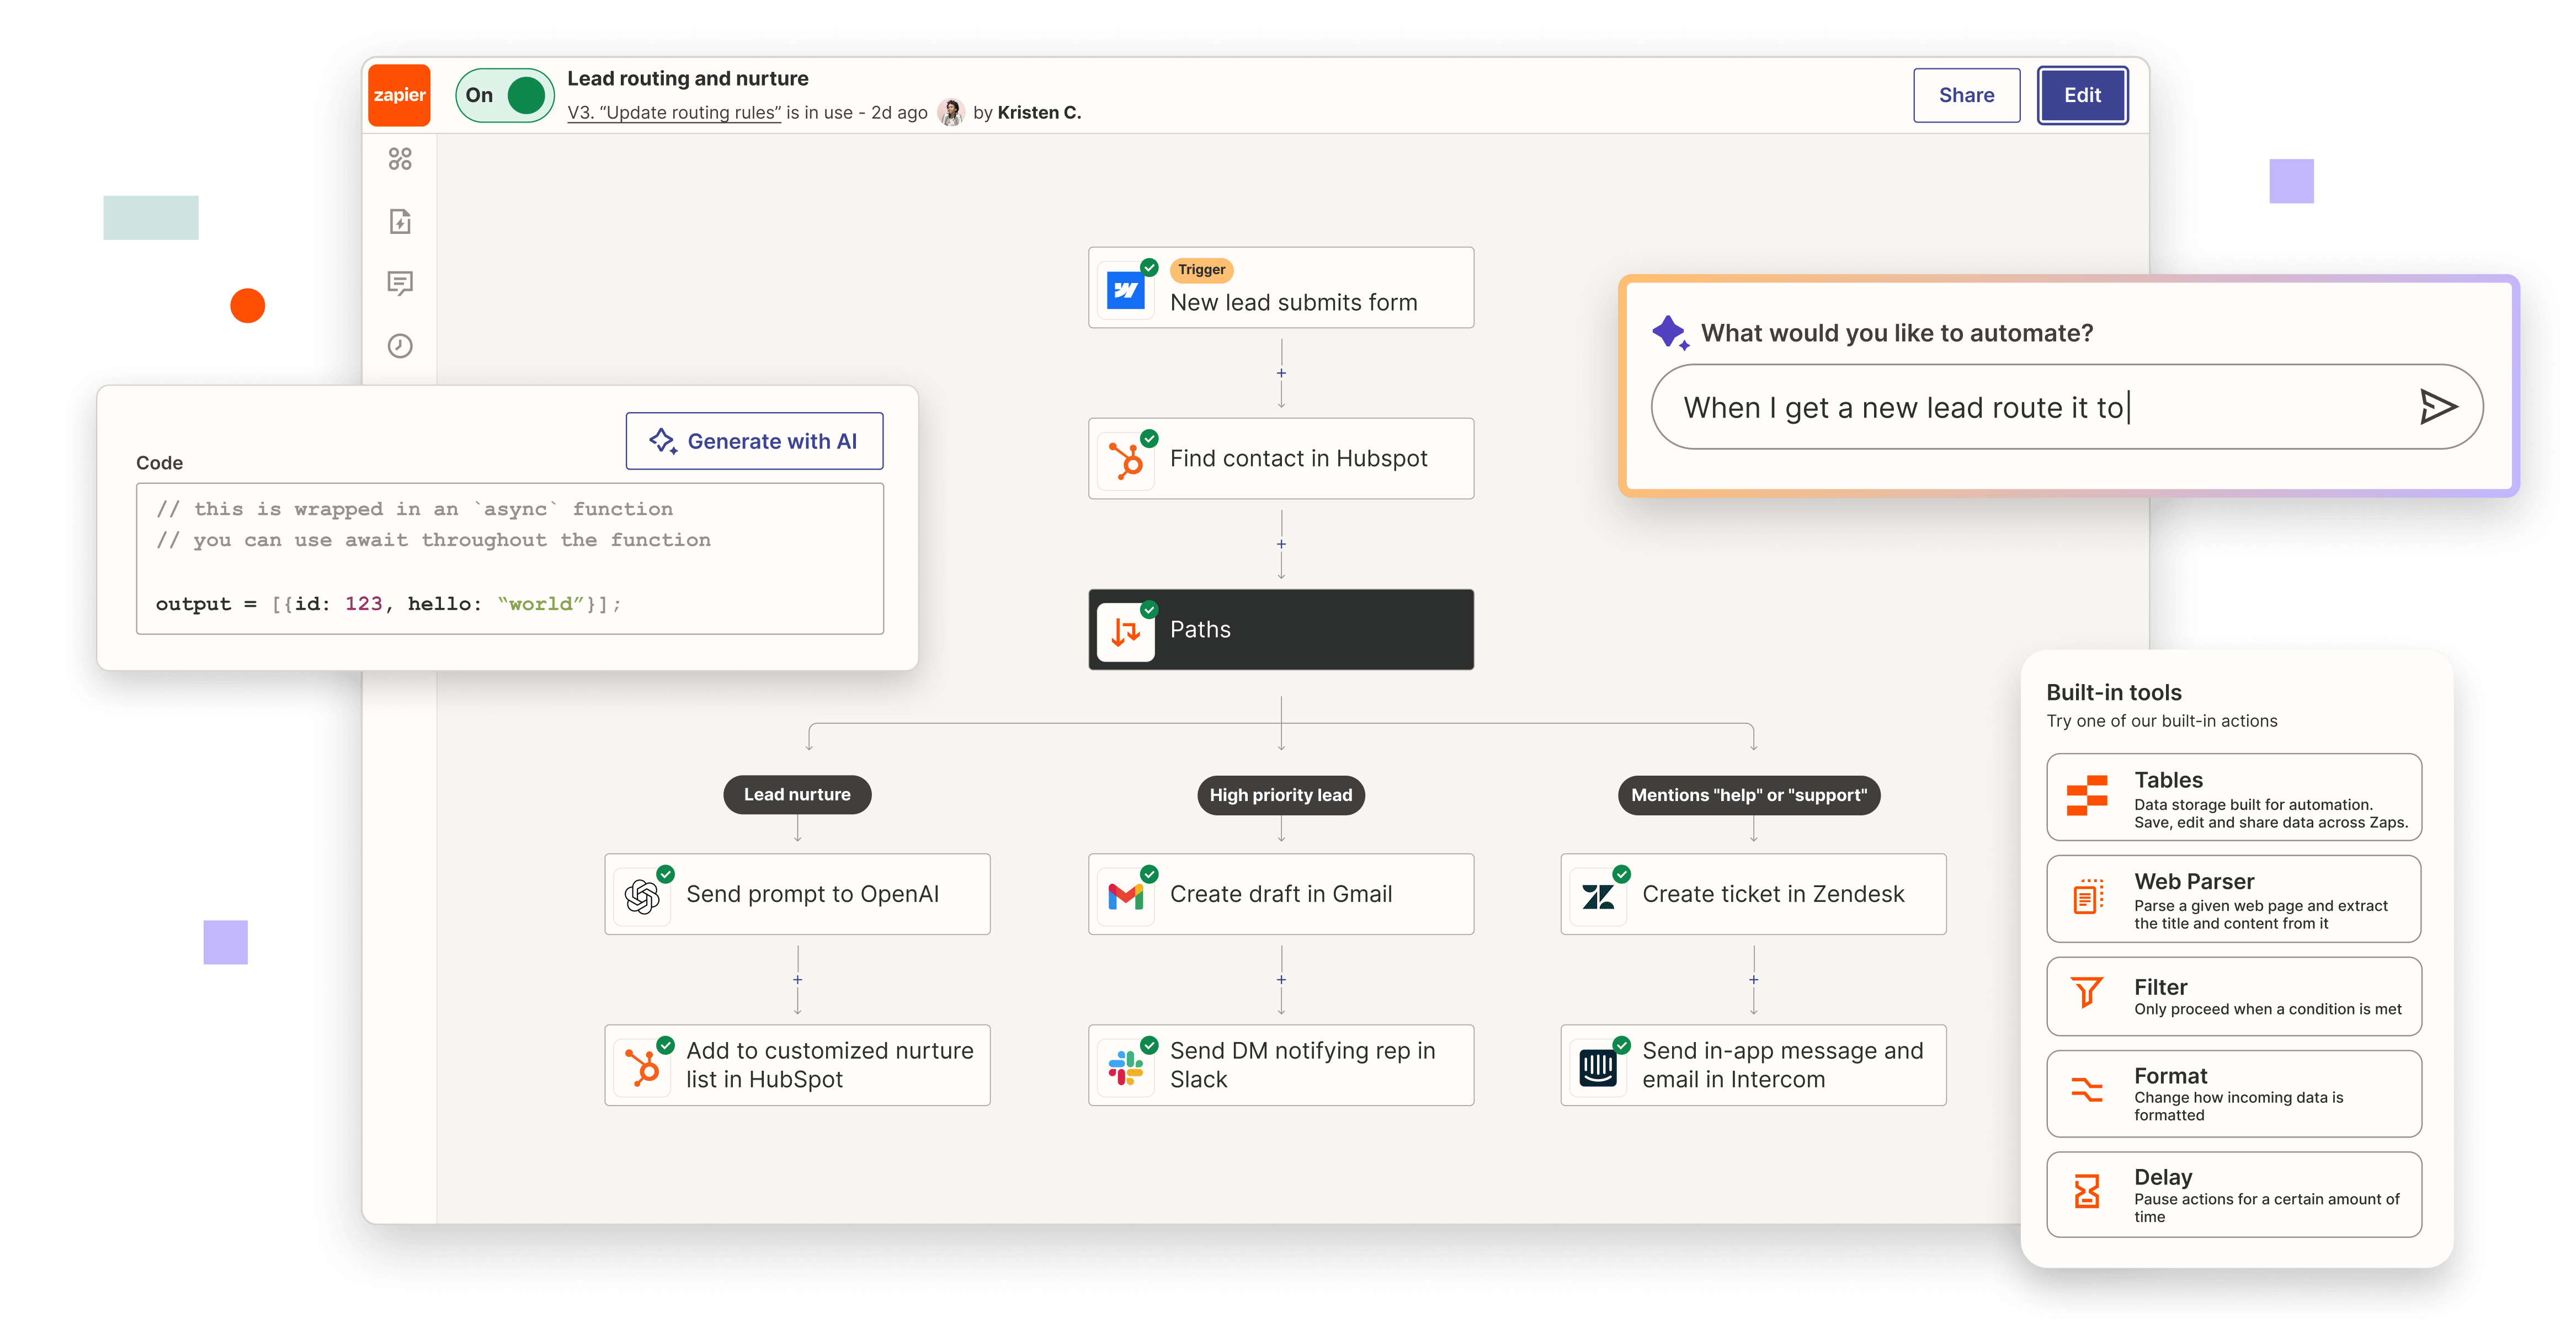 An interface of multi-step path workflow featuring Co-pilot, Built-in tools, and code step.